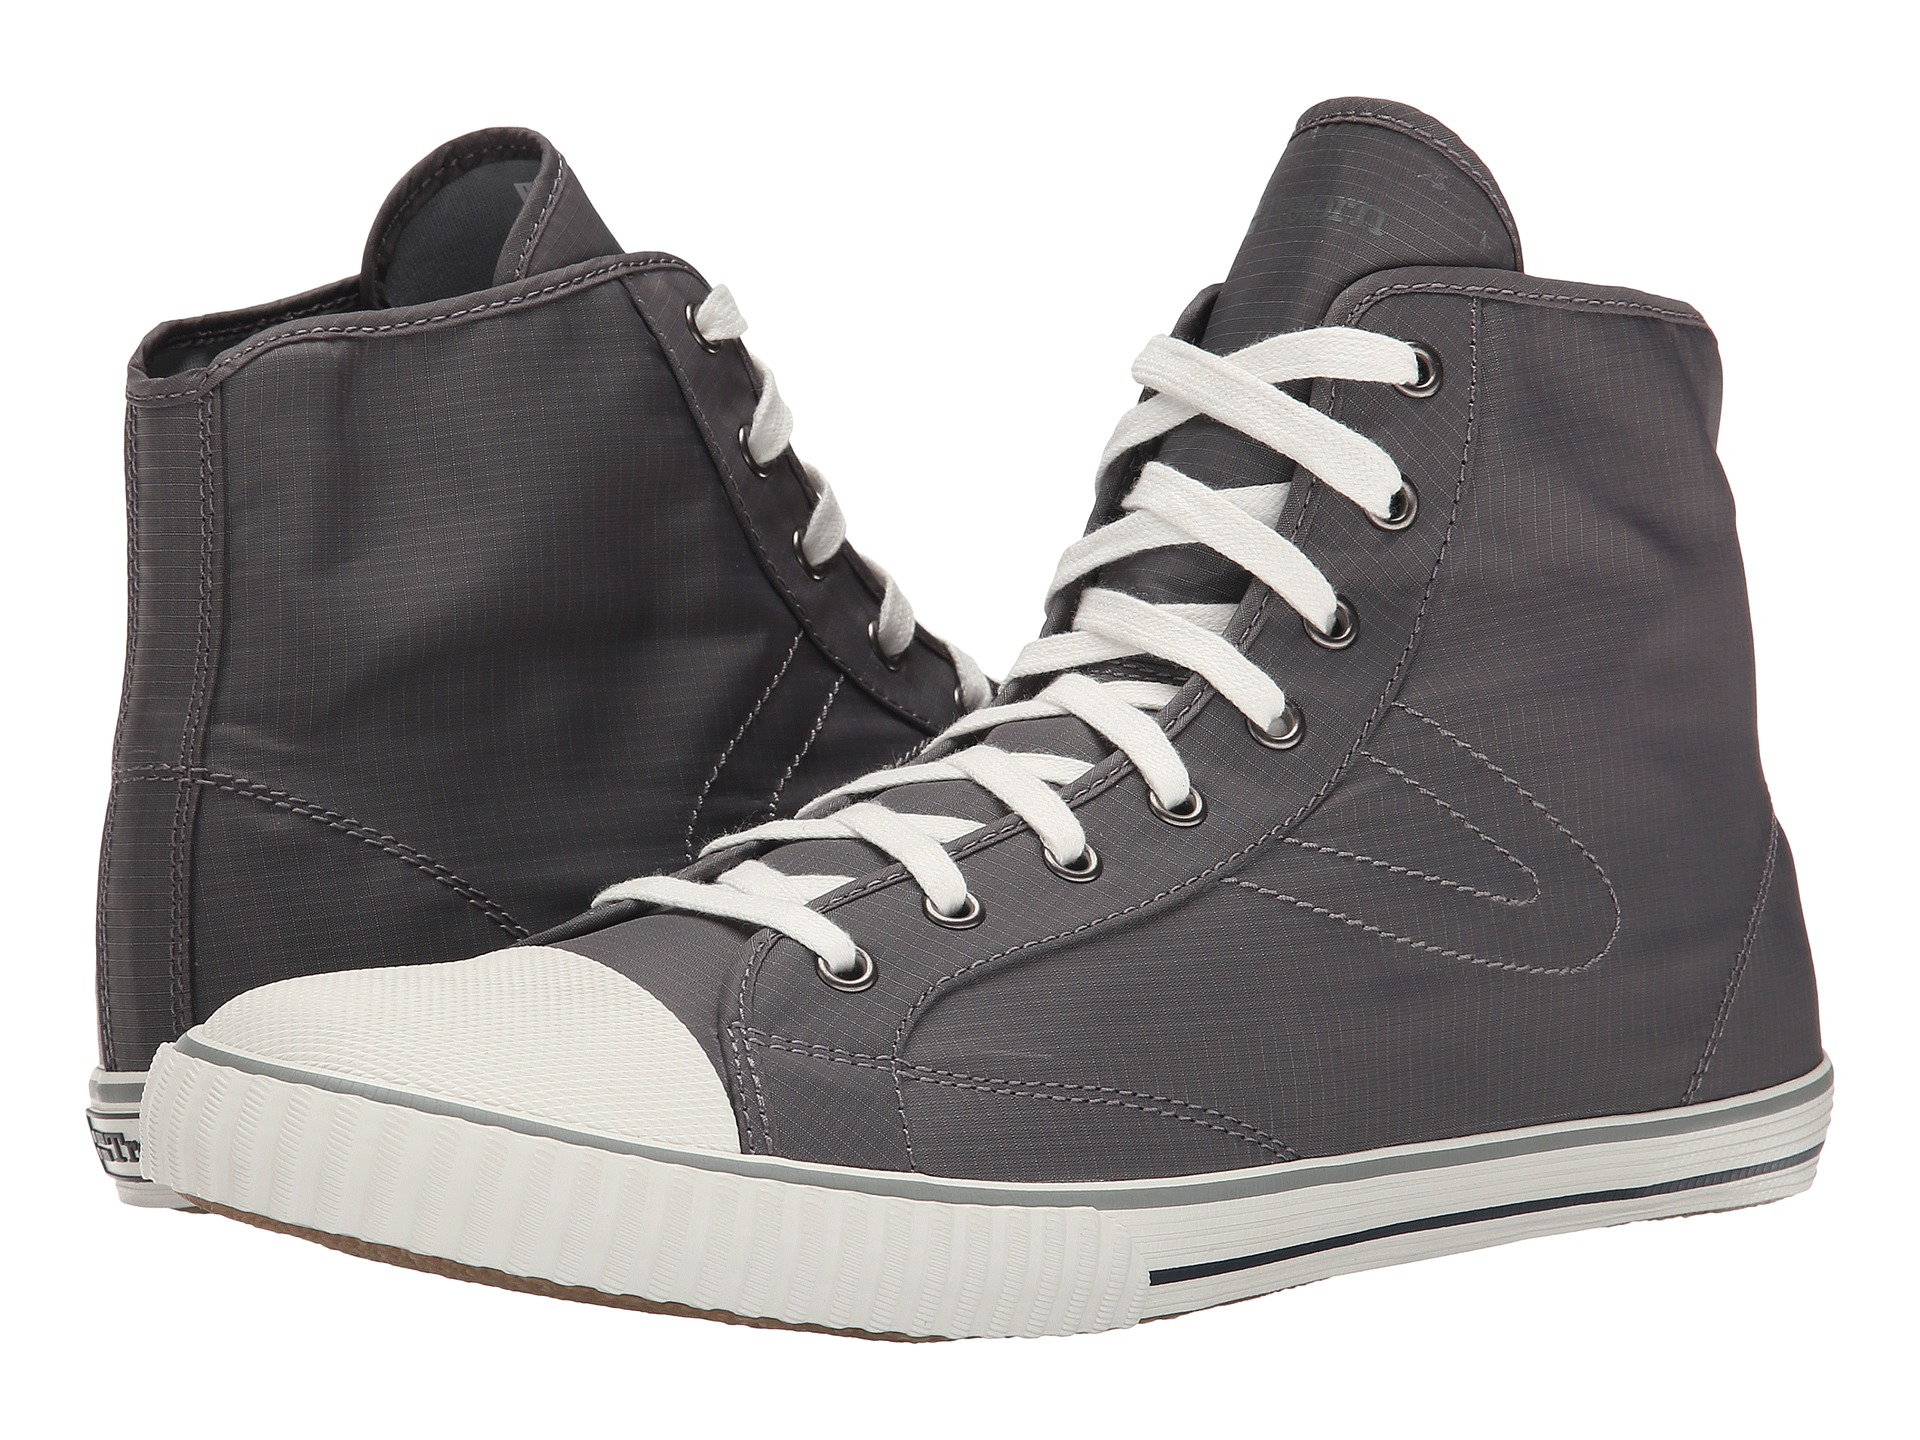 Tretorn Hockey Boot Rip-stop in Charcoal Gray (Gray) for Men - Lyst